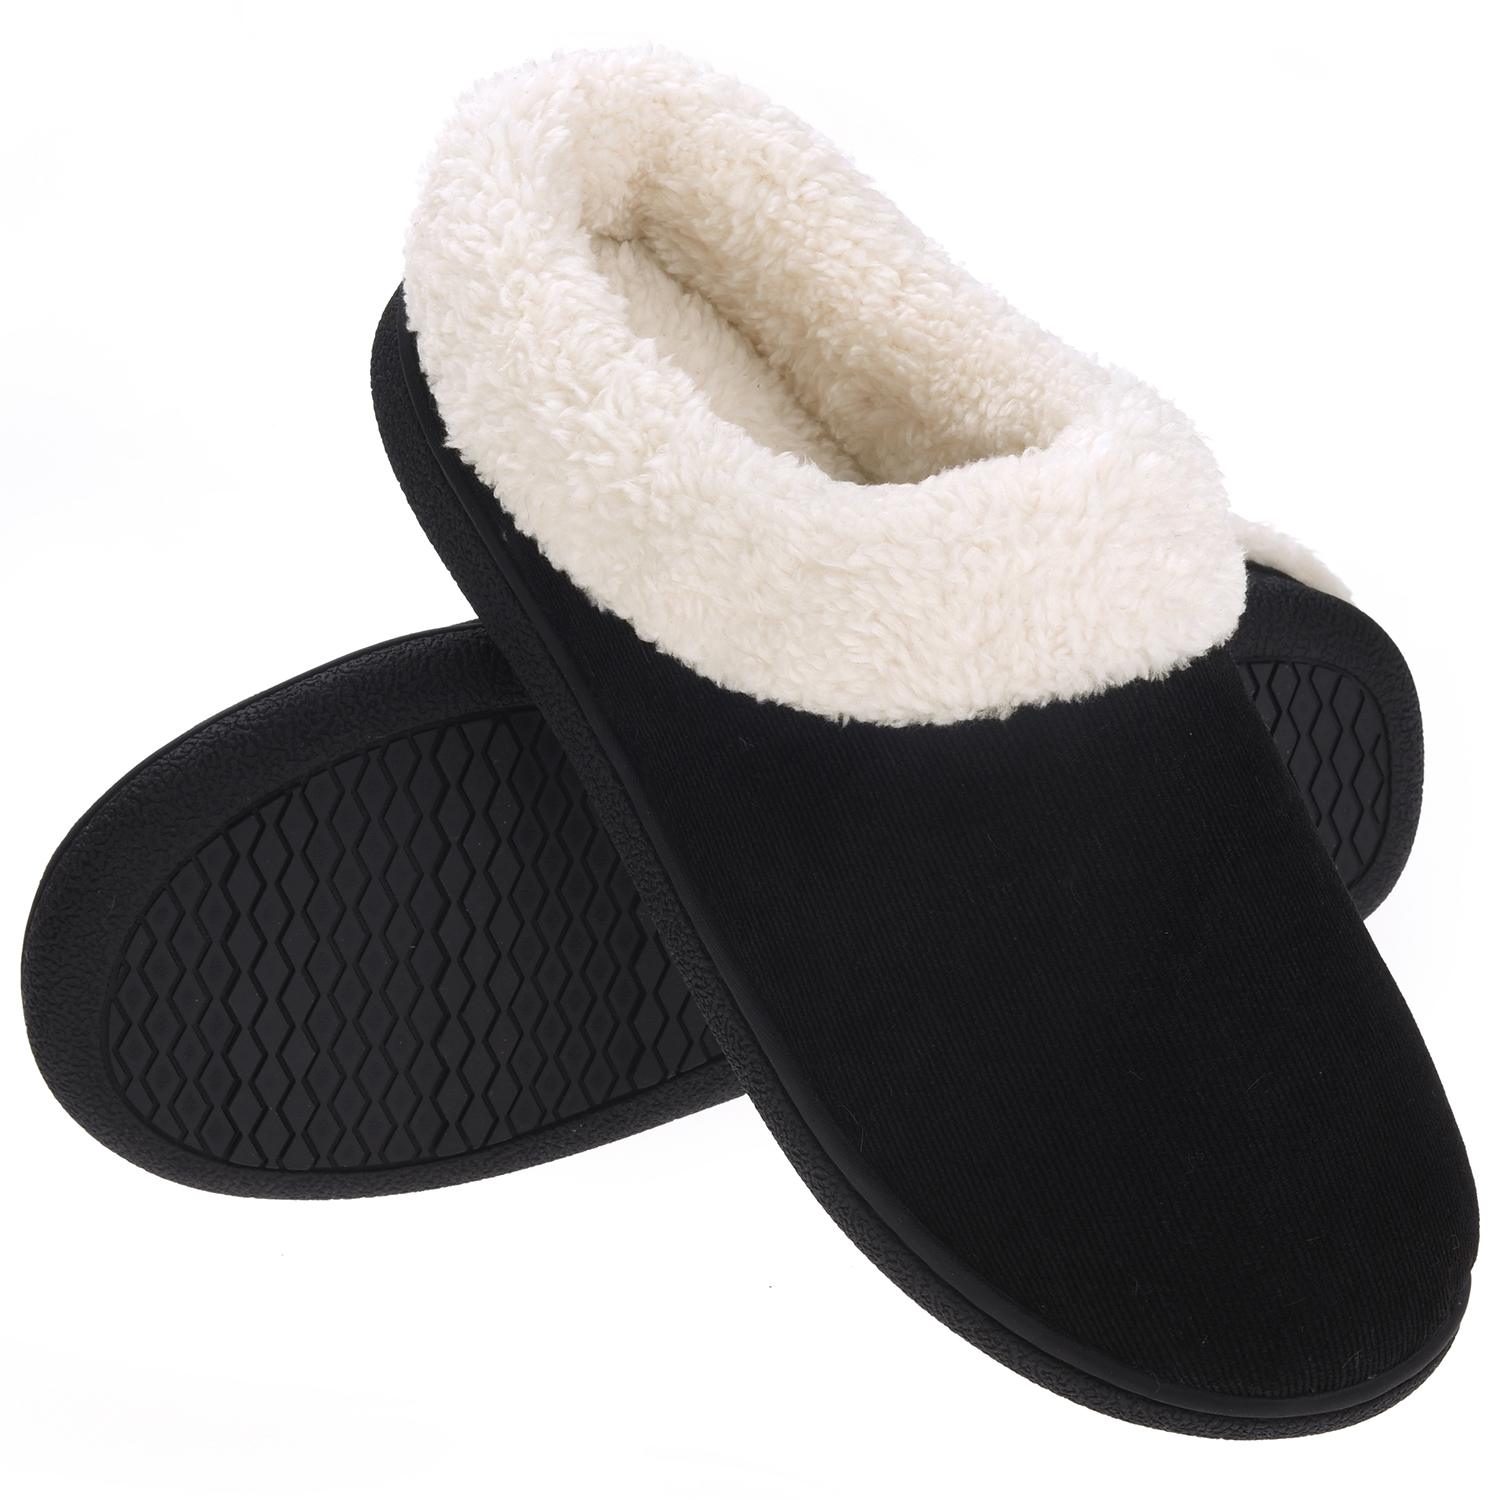 VONMAY Women's Slippers Fuzzy Slip On Indoor Outdoor House Shoes - image 1 of 7